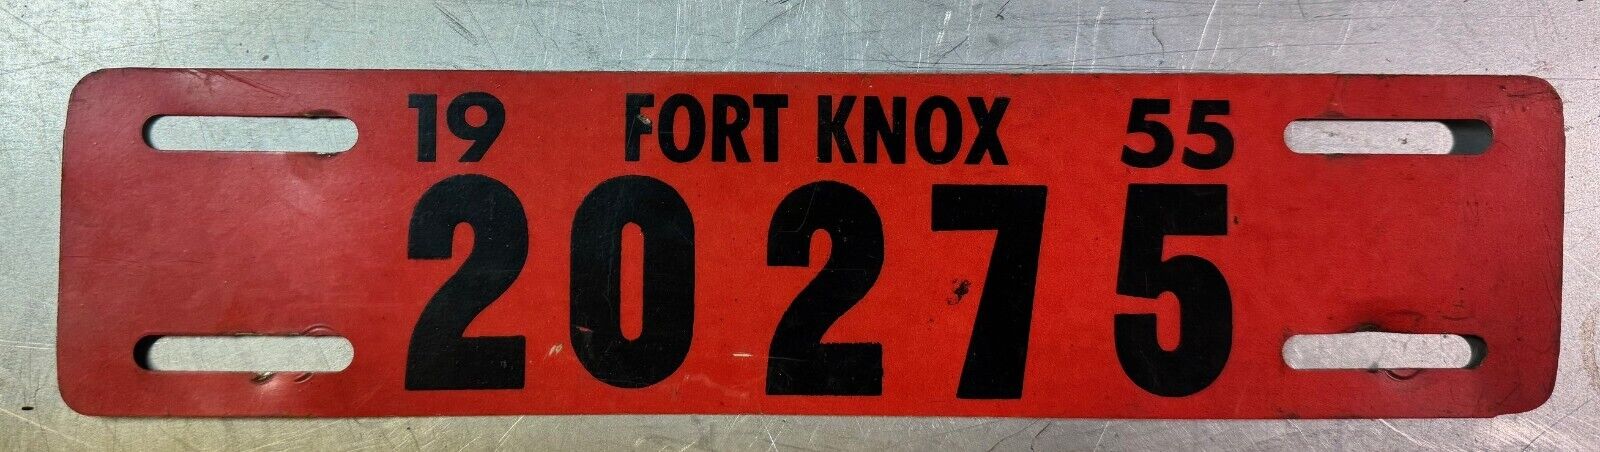 Vintage Fort Knox rare 1955 license plate topper Hot rat rod military